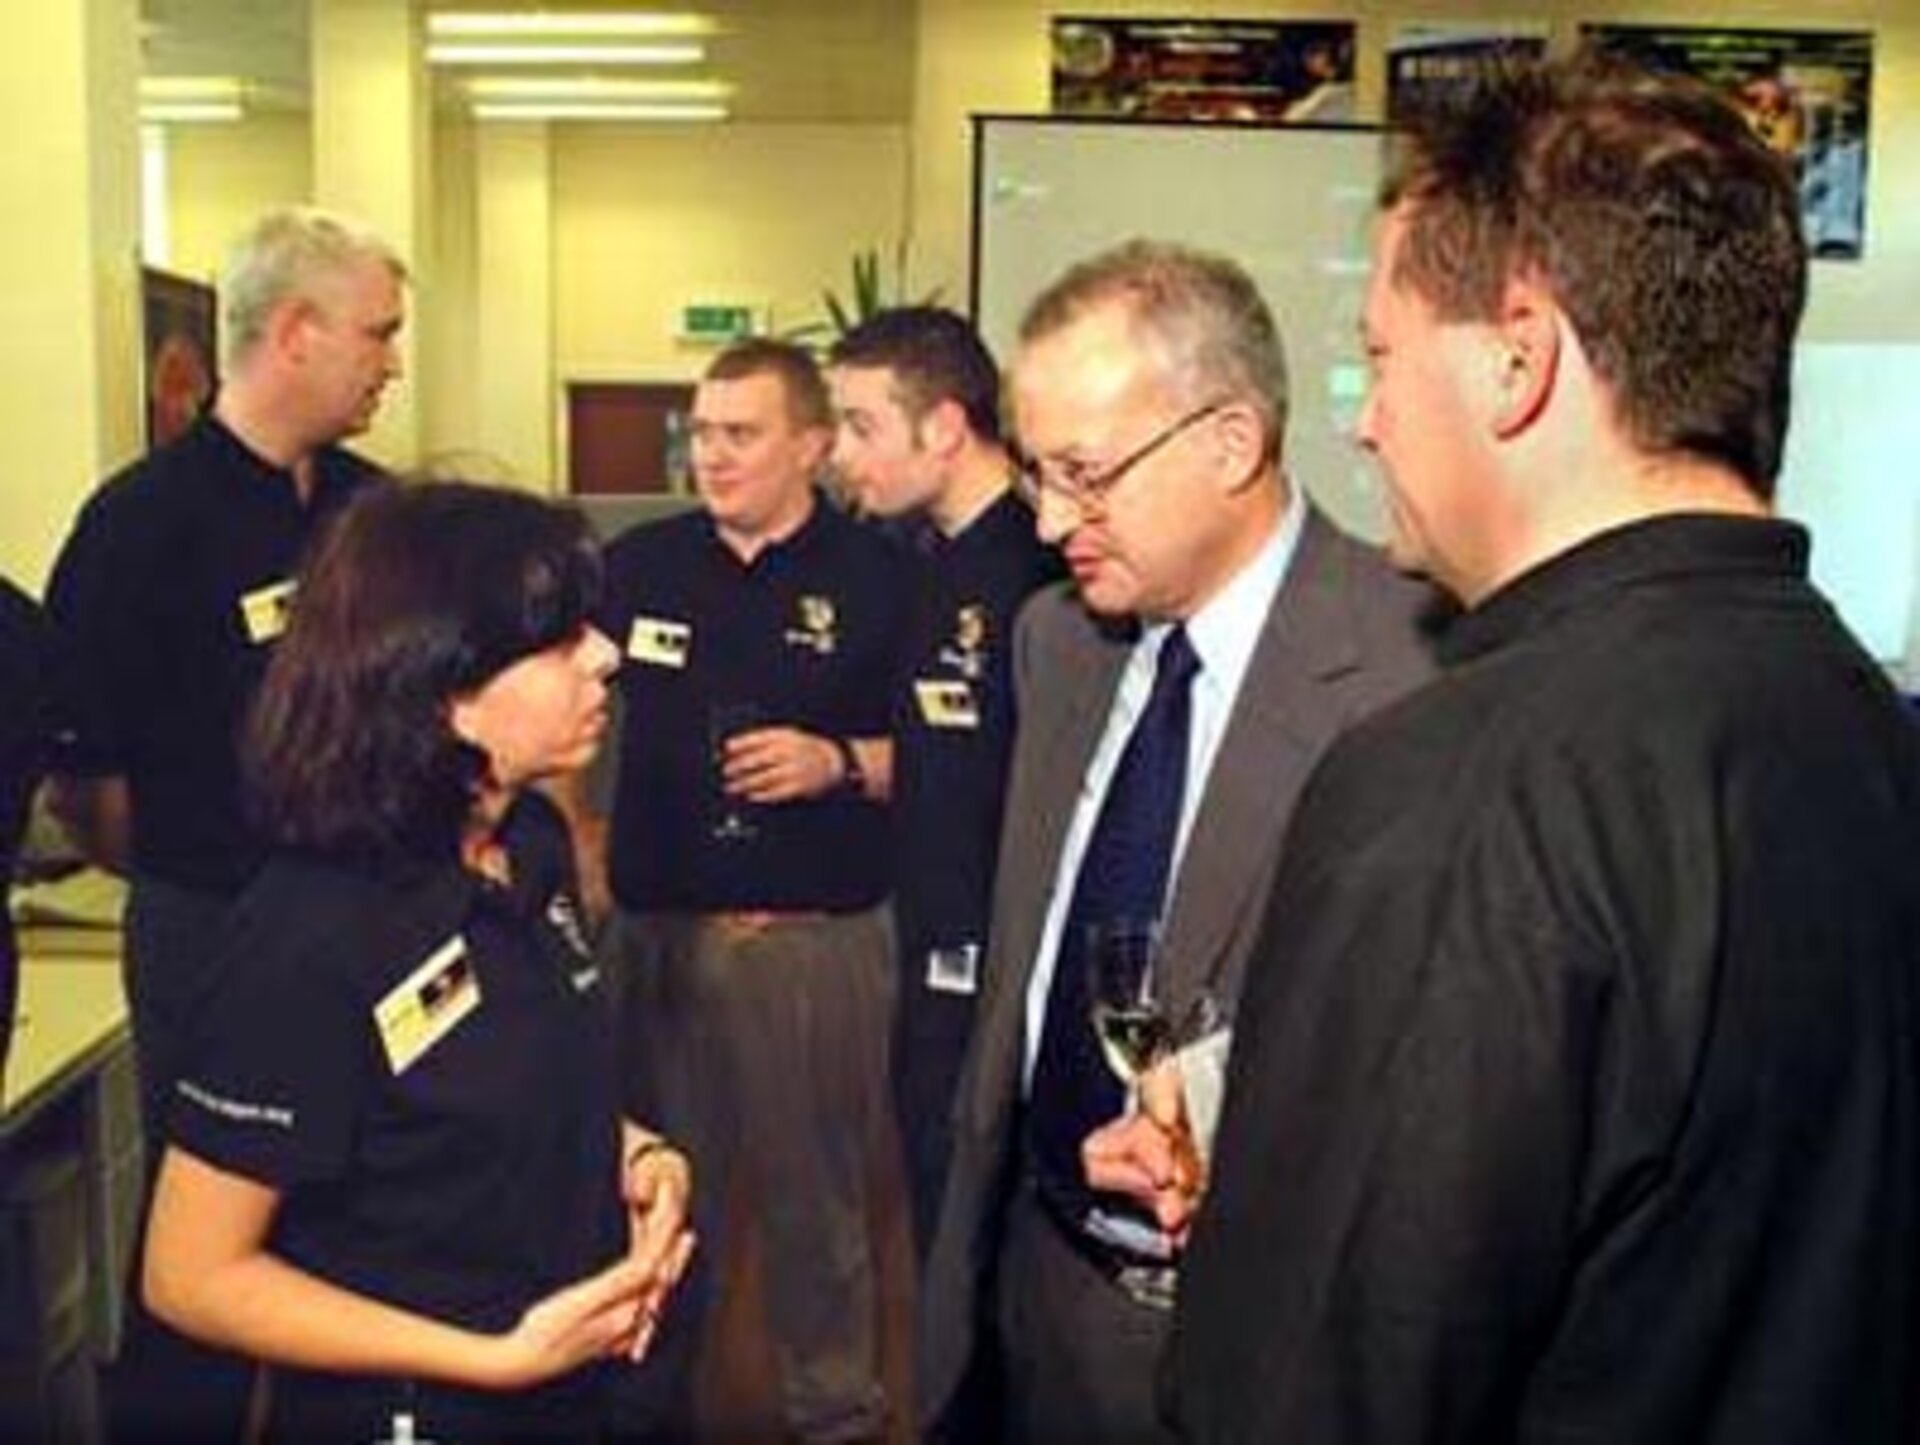 Star Tiger team member speaking with Lord Sainsbury